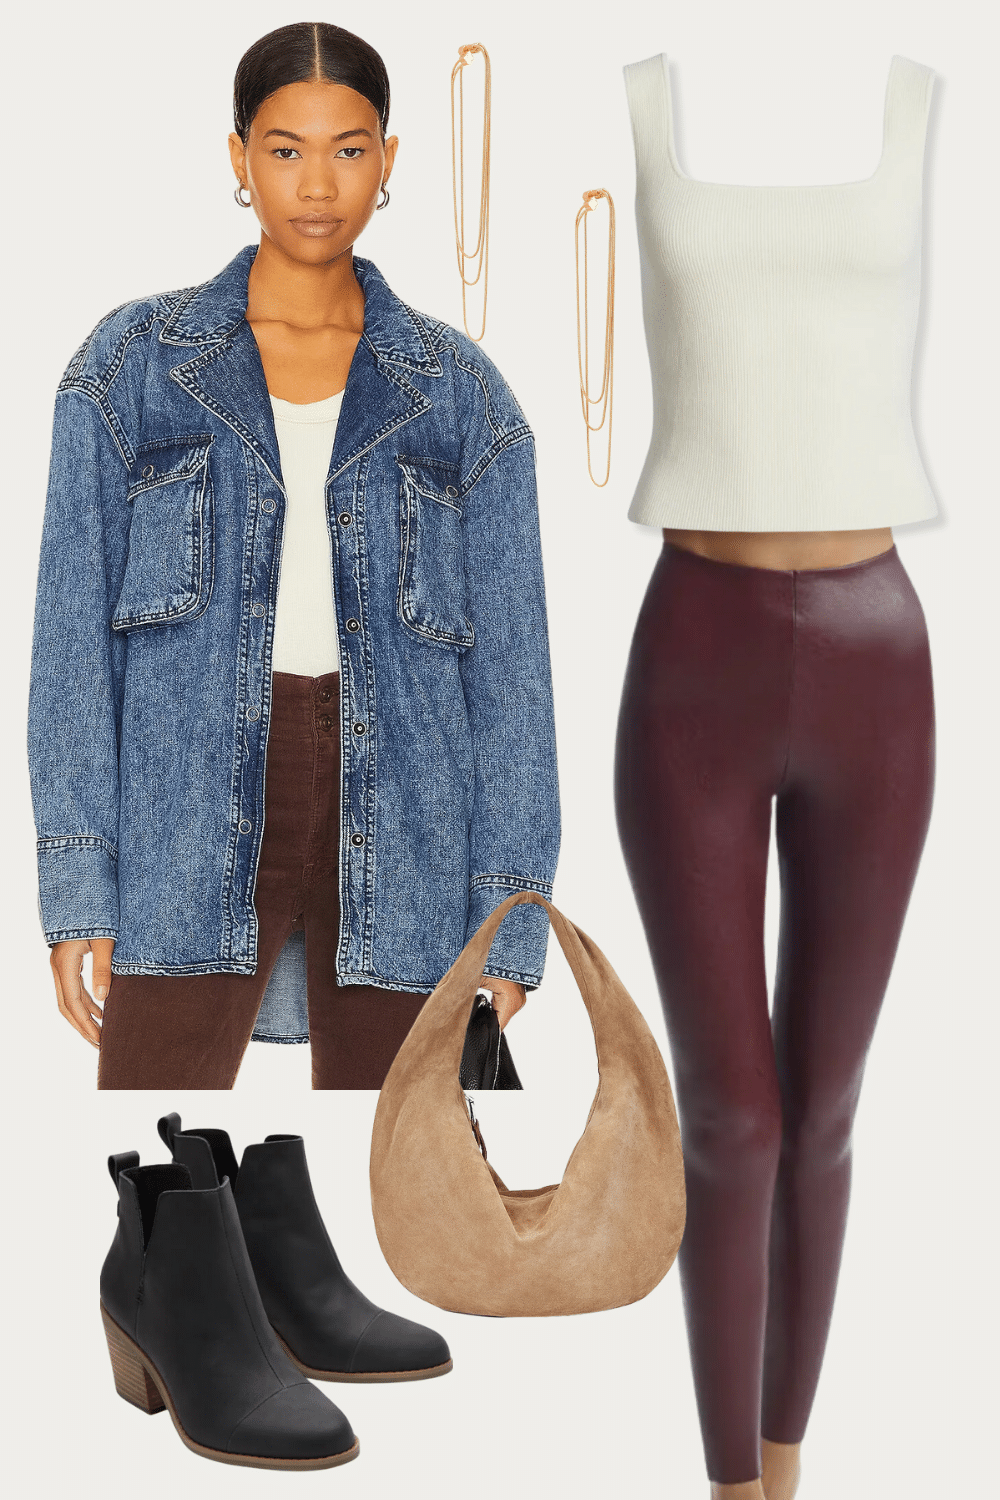 Faux leather leggings in merlot paired with a denim shacket and cream tank top